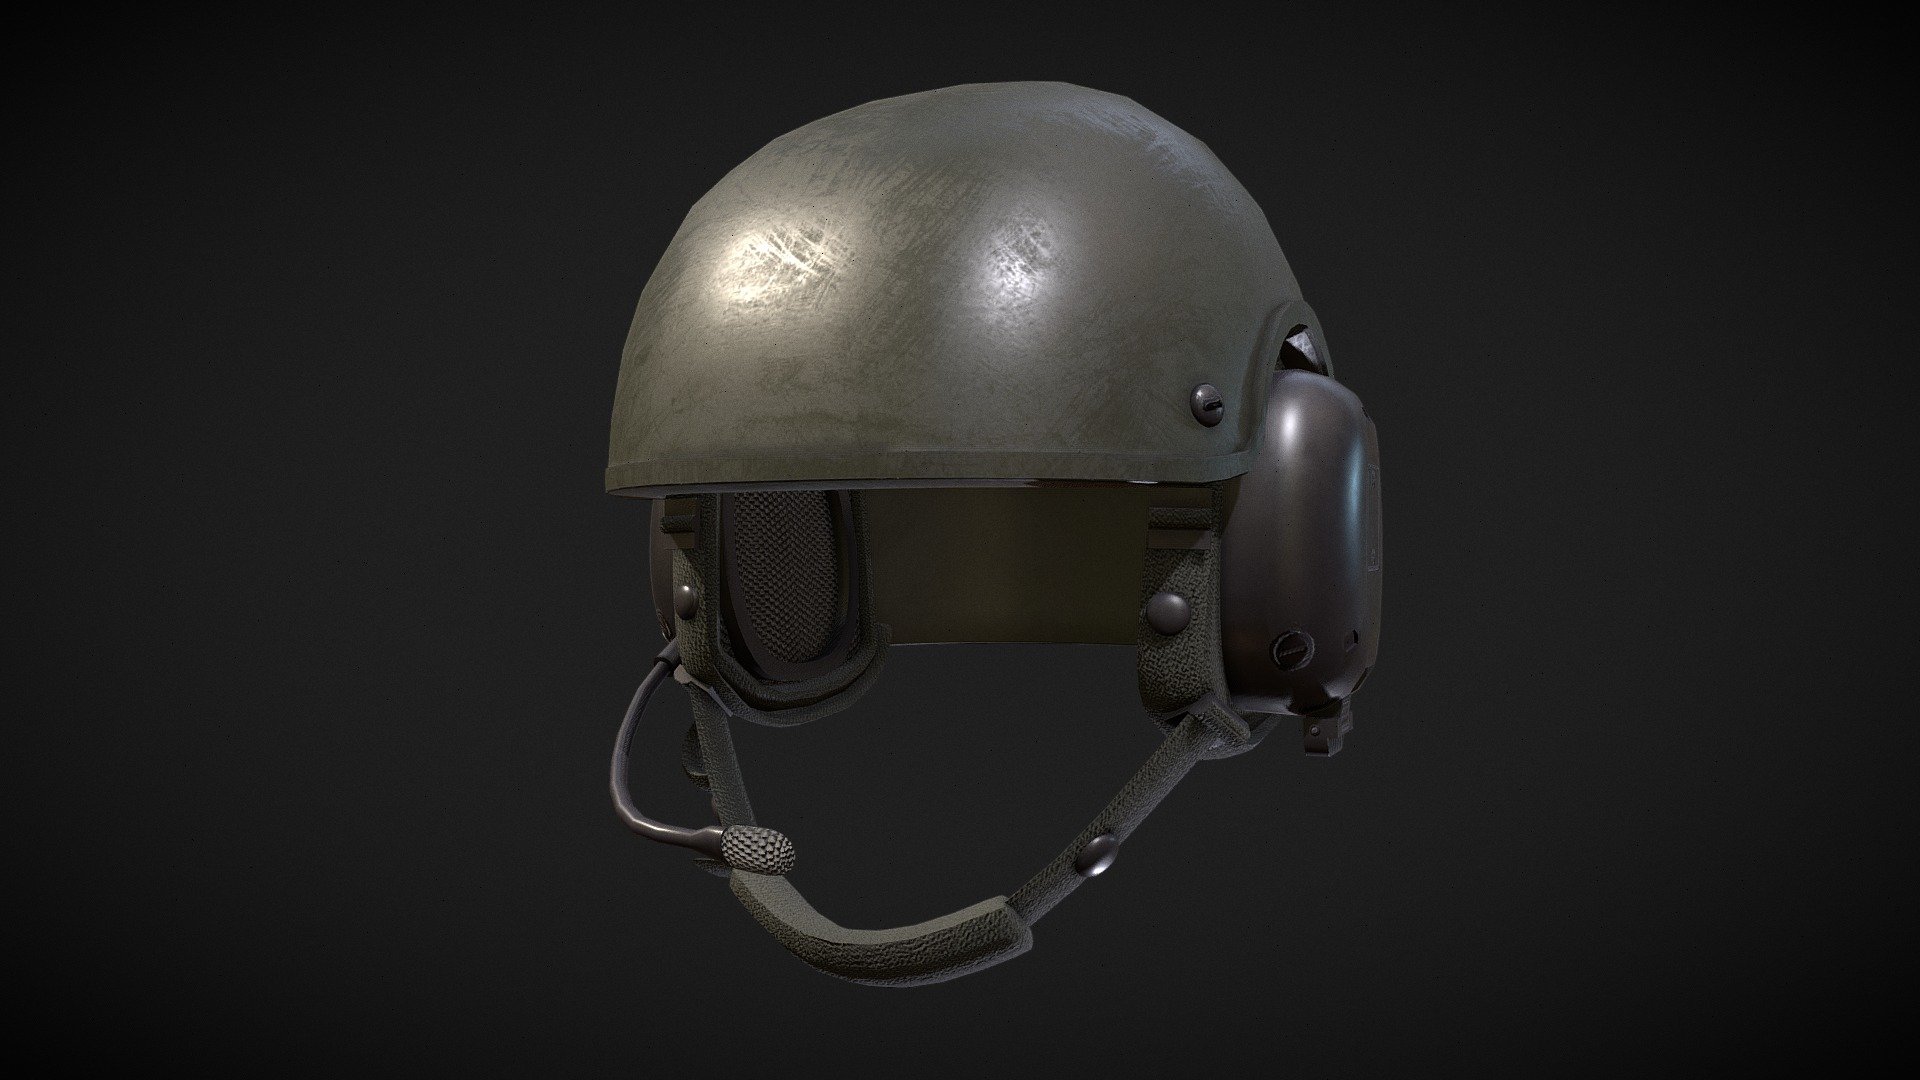 CVC Tanker Helmet Model/Art by Outworld Studios

Must give credit to Outworld Studios if using the asset.

Show support by joining my discord: https://discord.gg/EgWSkp8Cxn - CVC Combat Vehicle Crew Tanker Helmet - Buy Royalty Free 3D model by Outworld Studios (@outworldstudios) 3d model